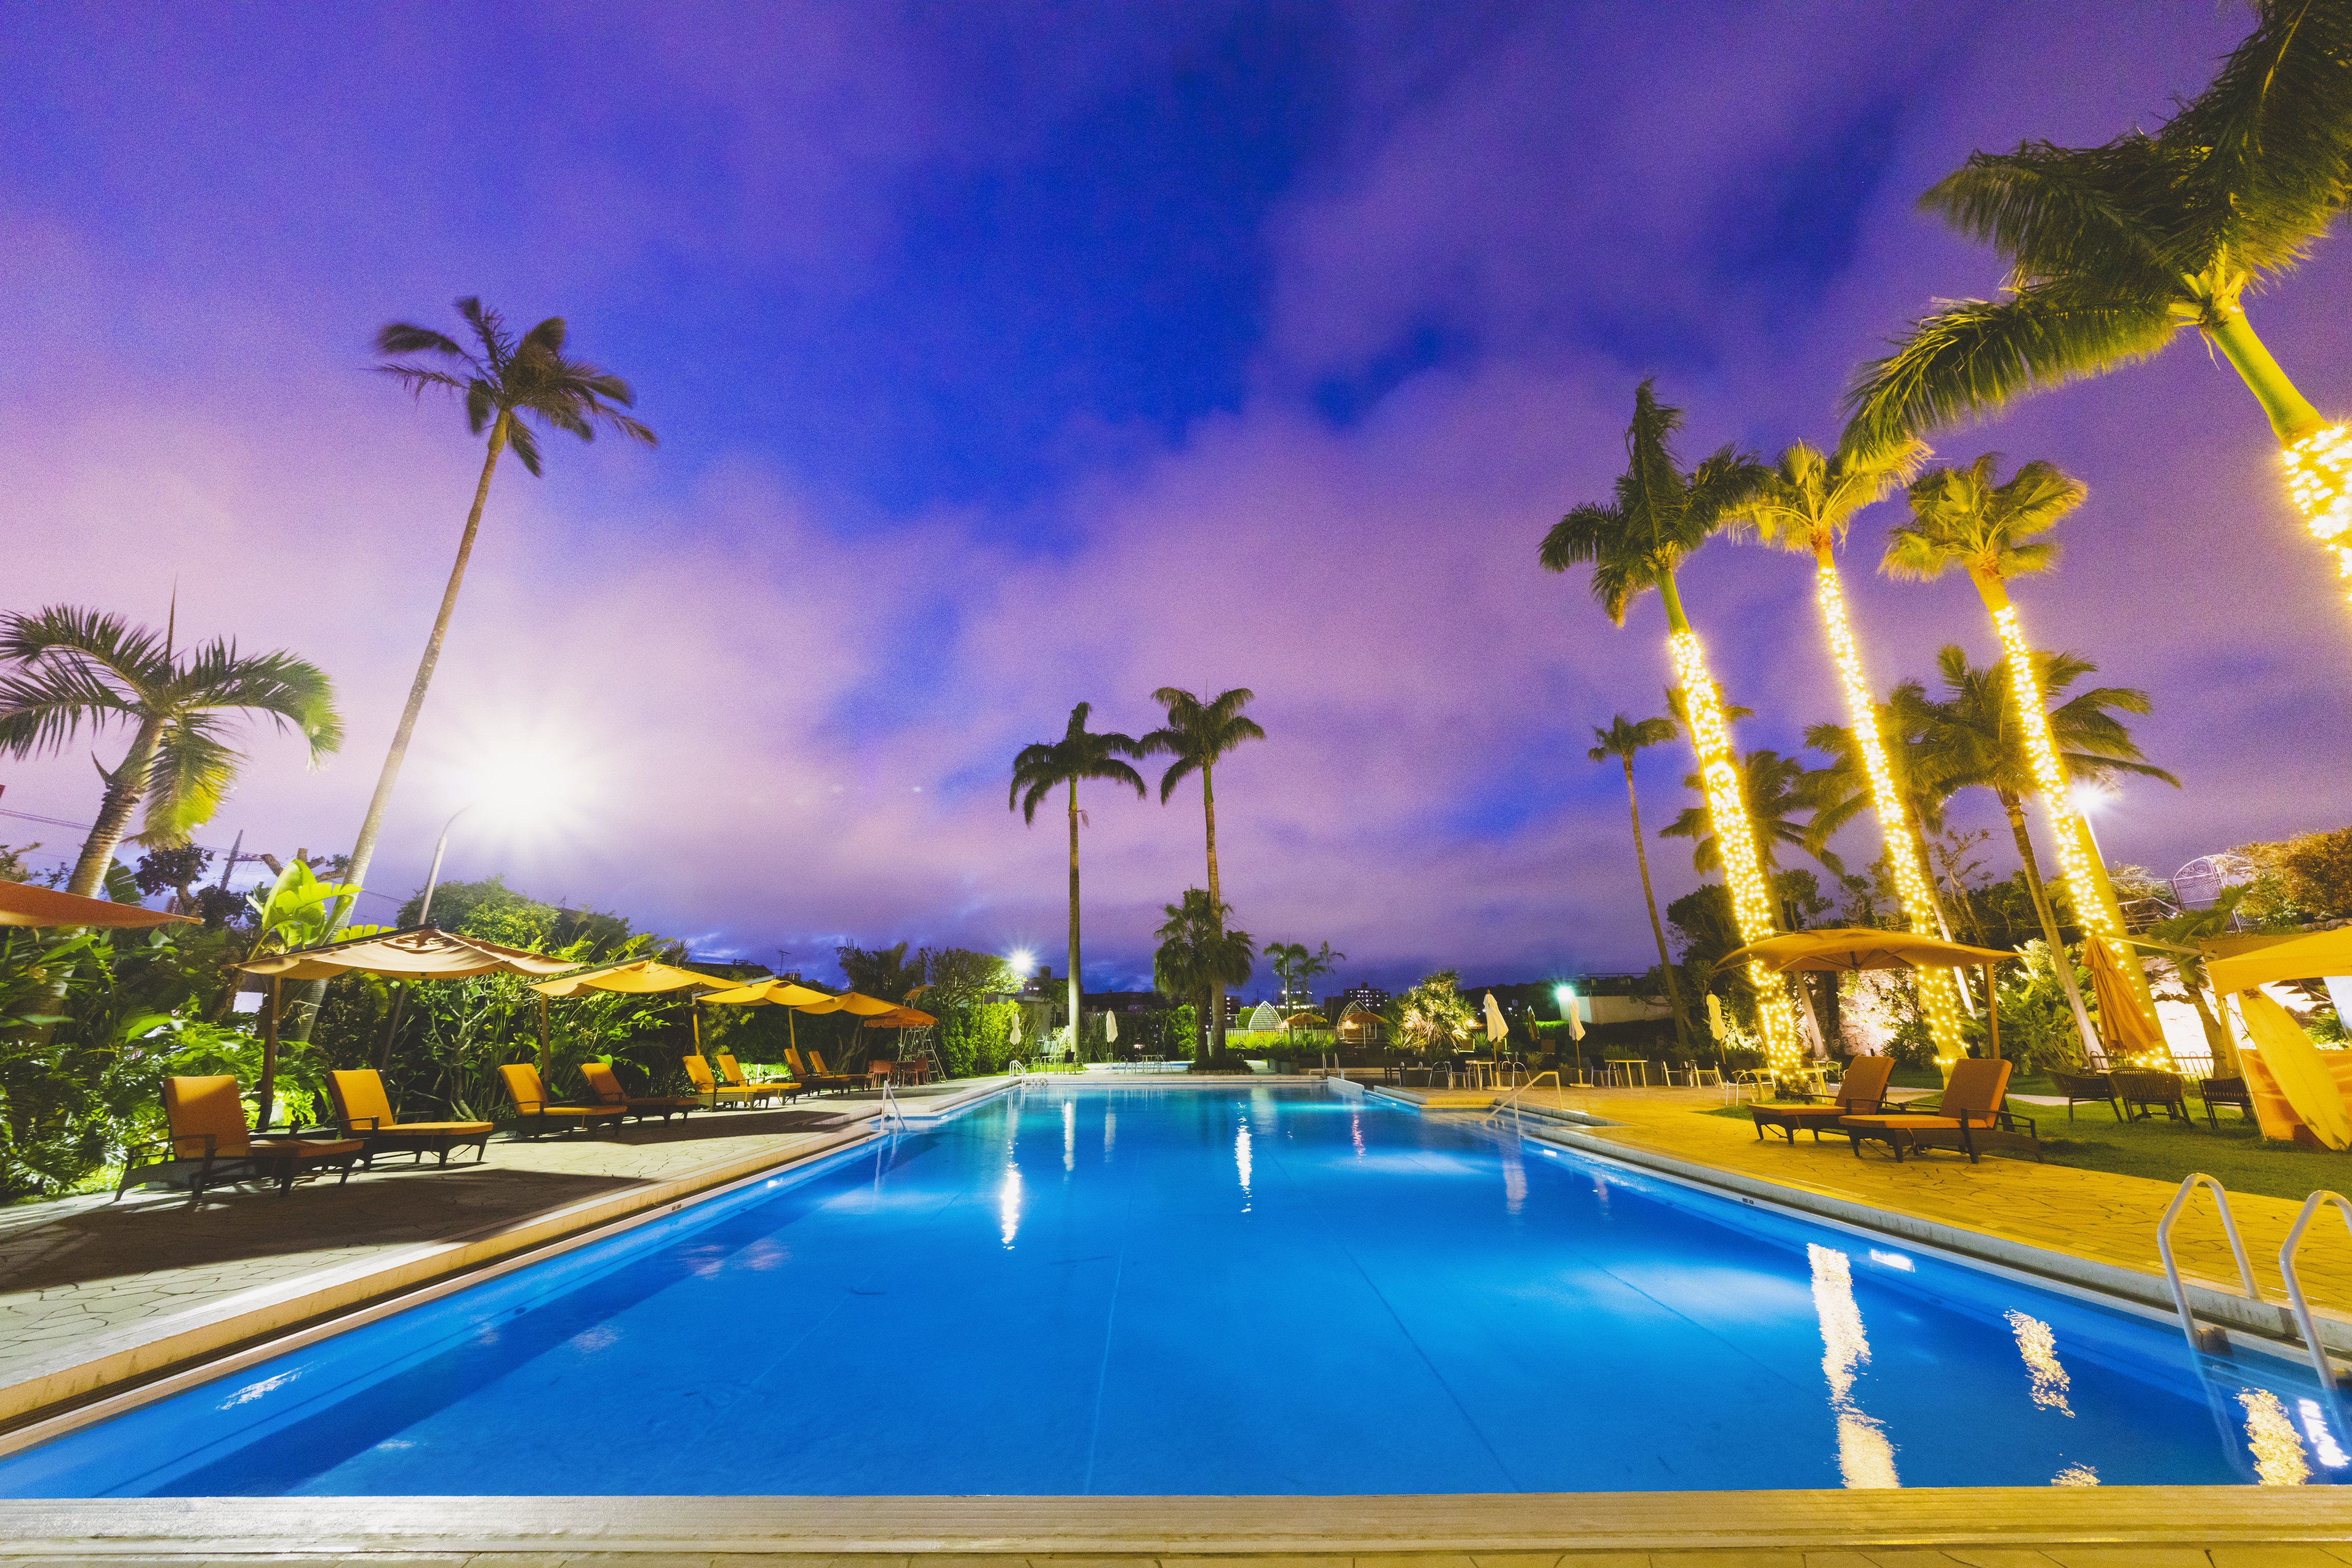 Outdoor Pool Area at Night with Palm Trees